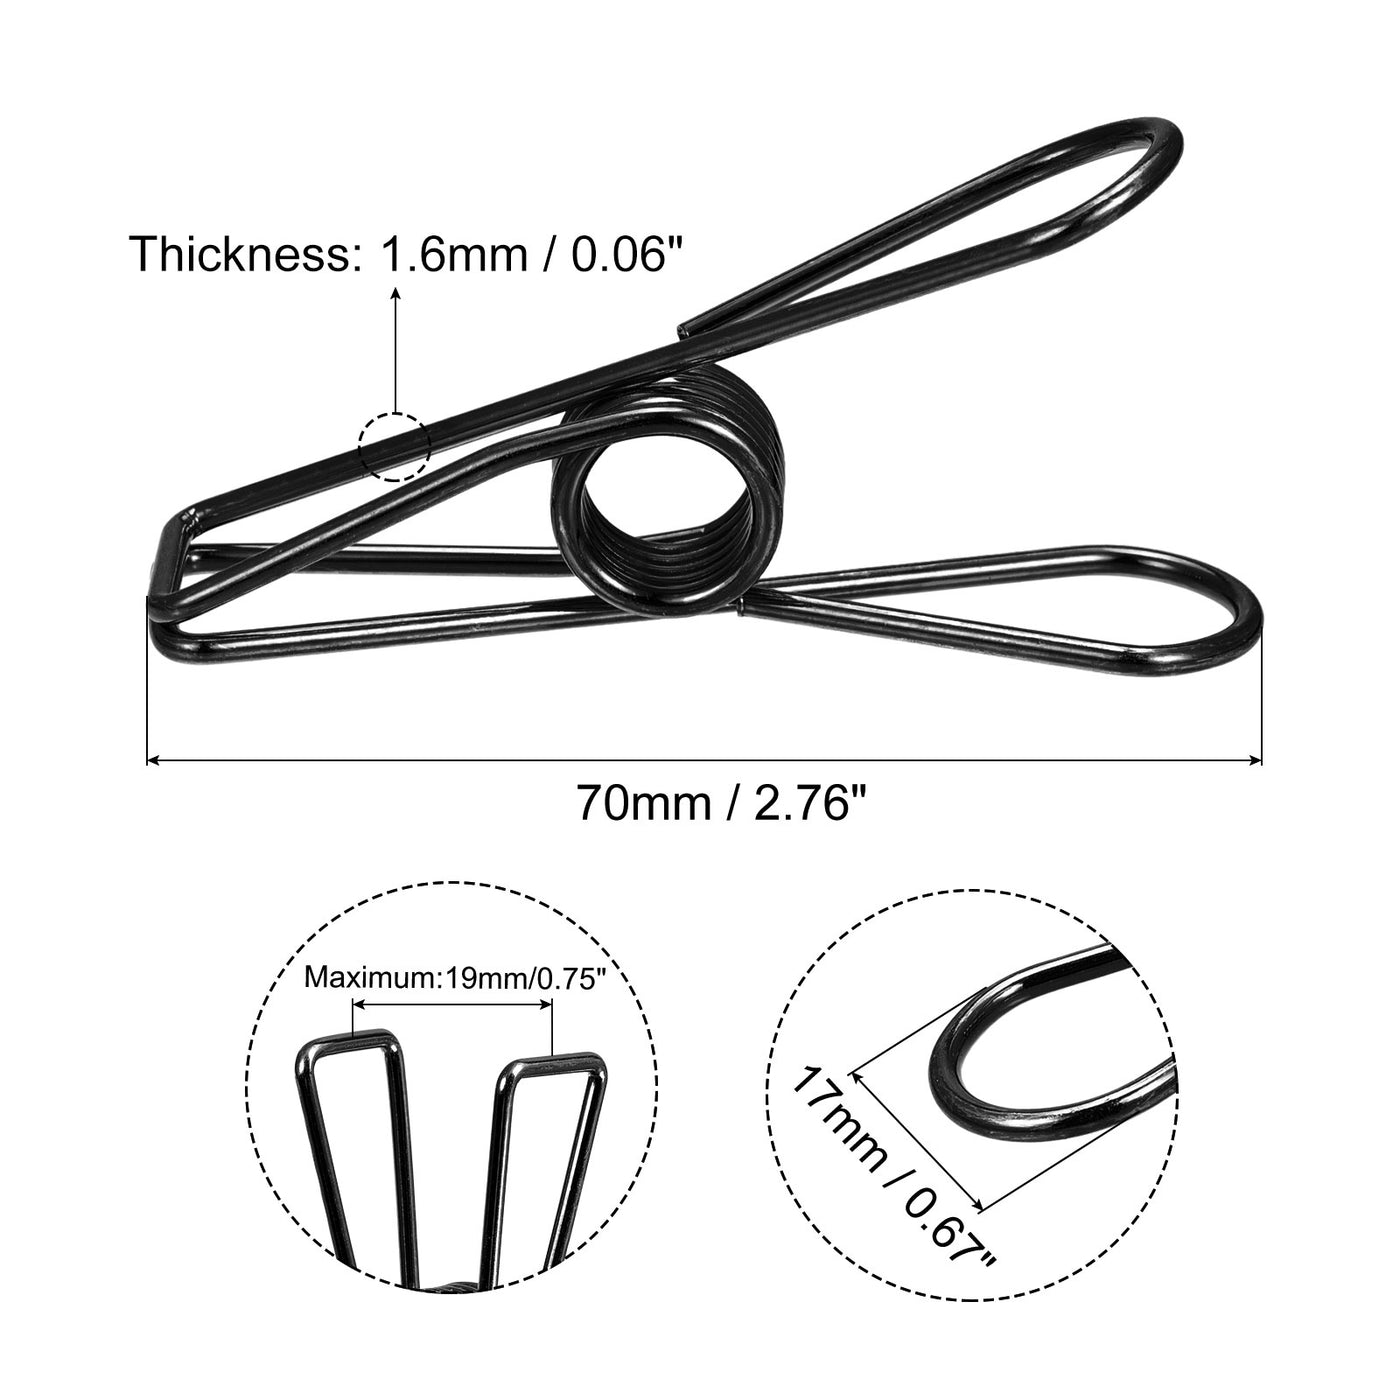 uxcell Uxcell Tablecloth Clips, 70mm Carbon Steel Clamps for Fix Table Cloth, Black 8 Pcs